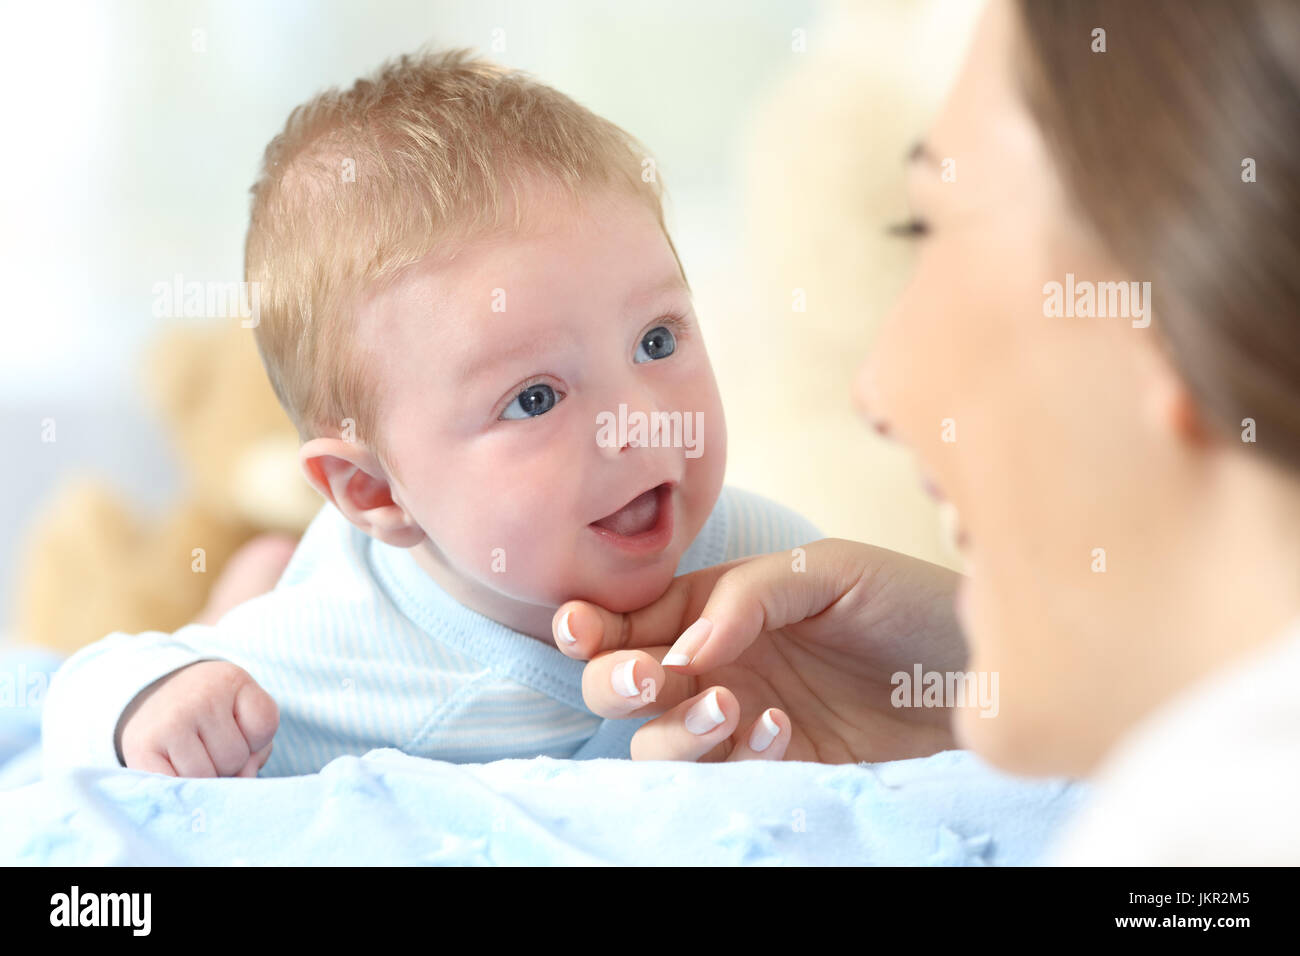 Close up portrait of a happy baby and mother looking each other on a bed Stock Photo